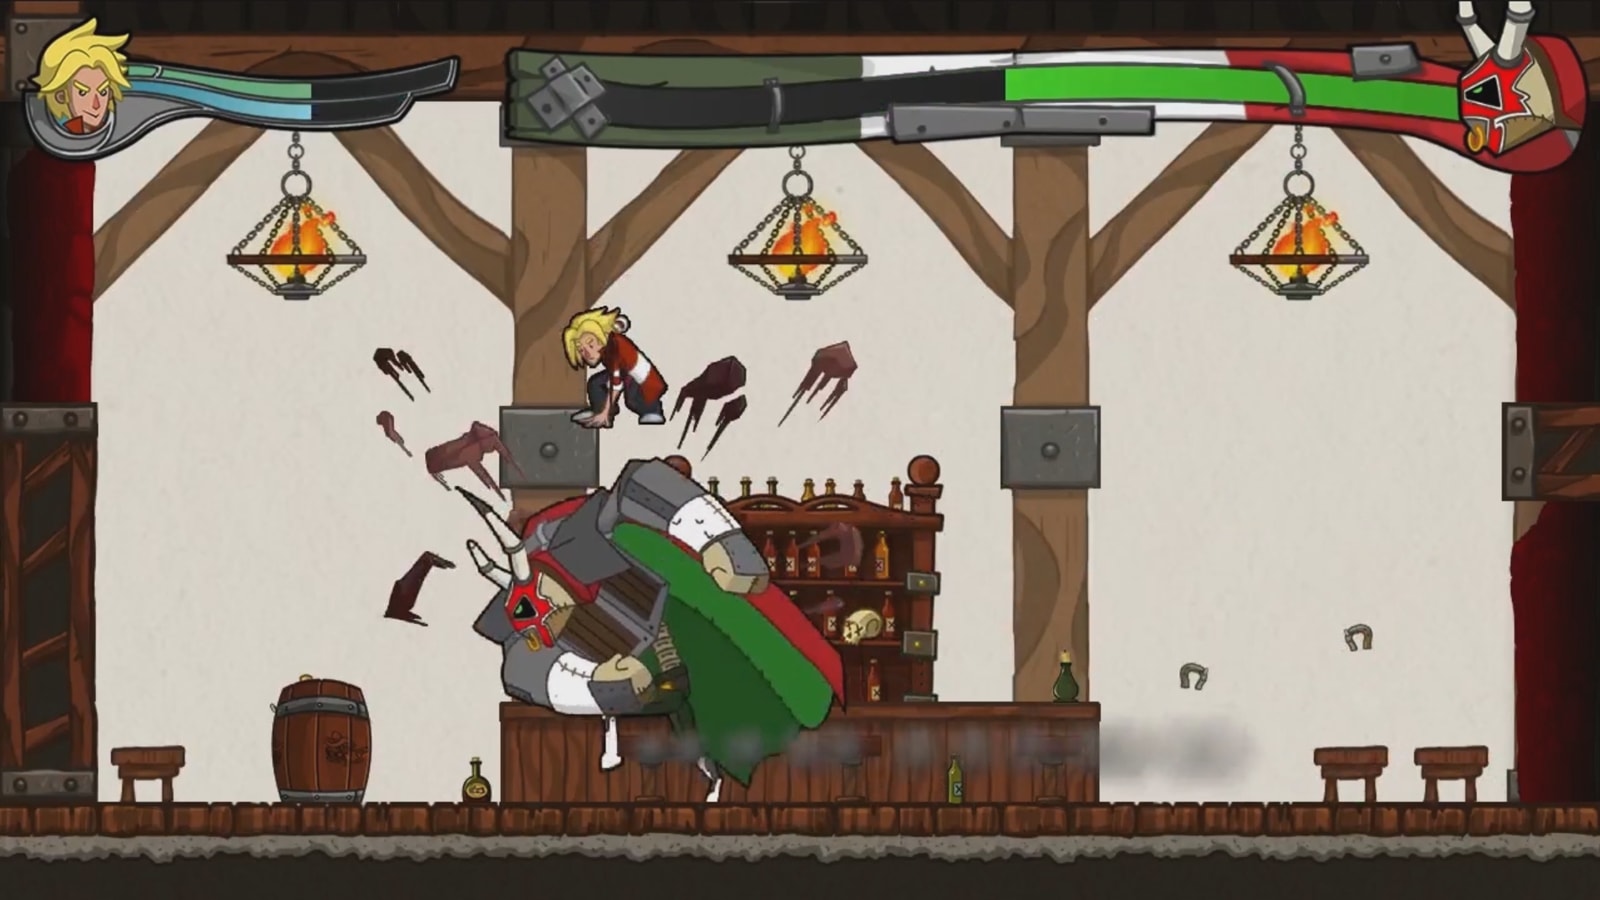 Jero leaps above a charging knight wearing a horned mask in a pub